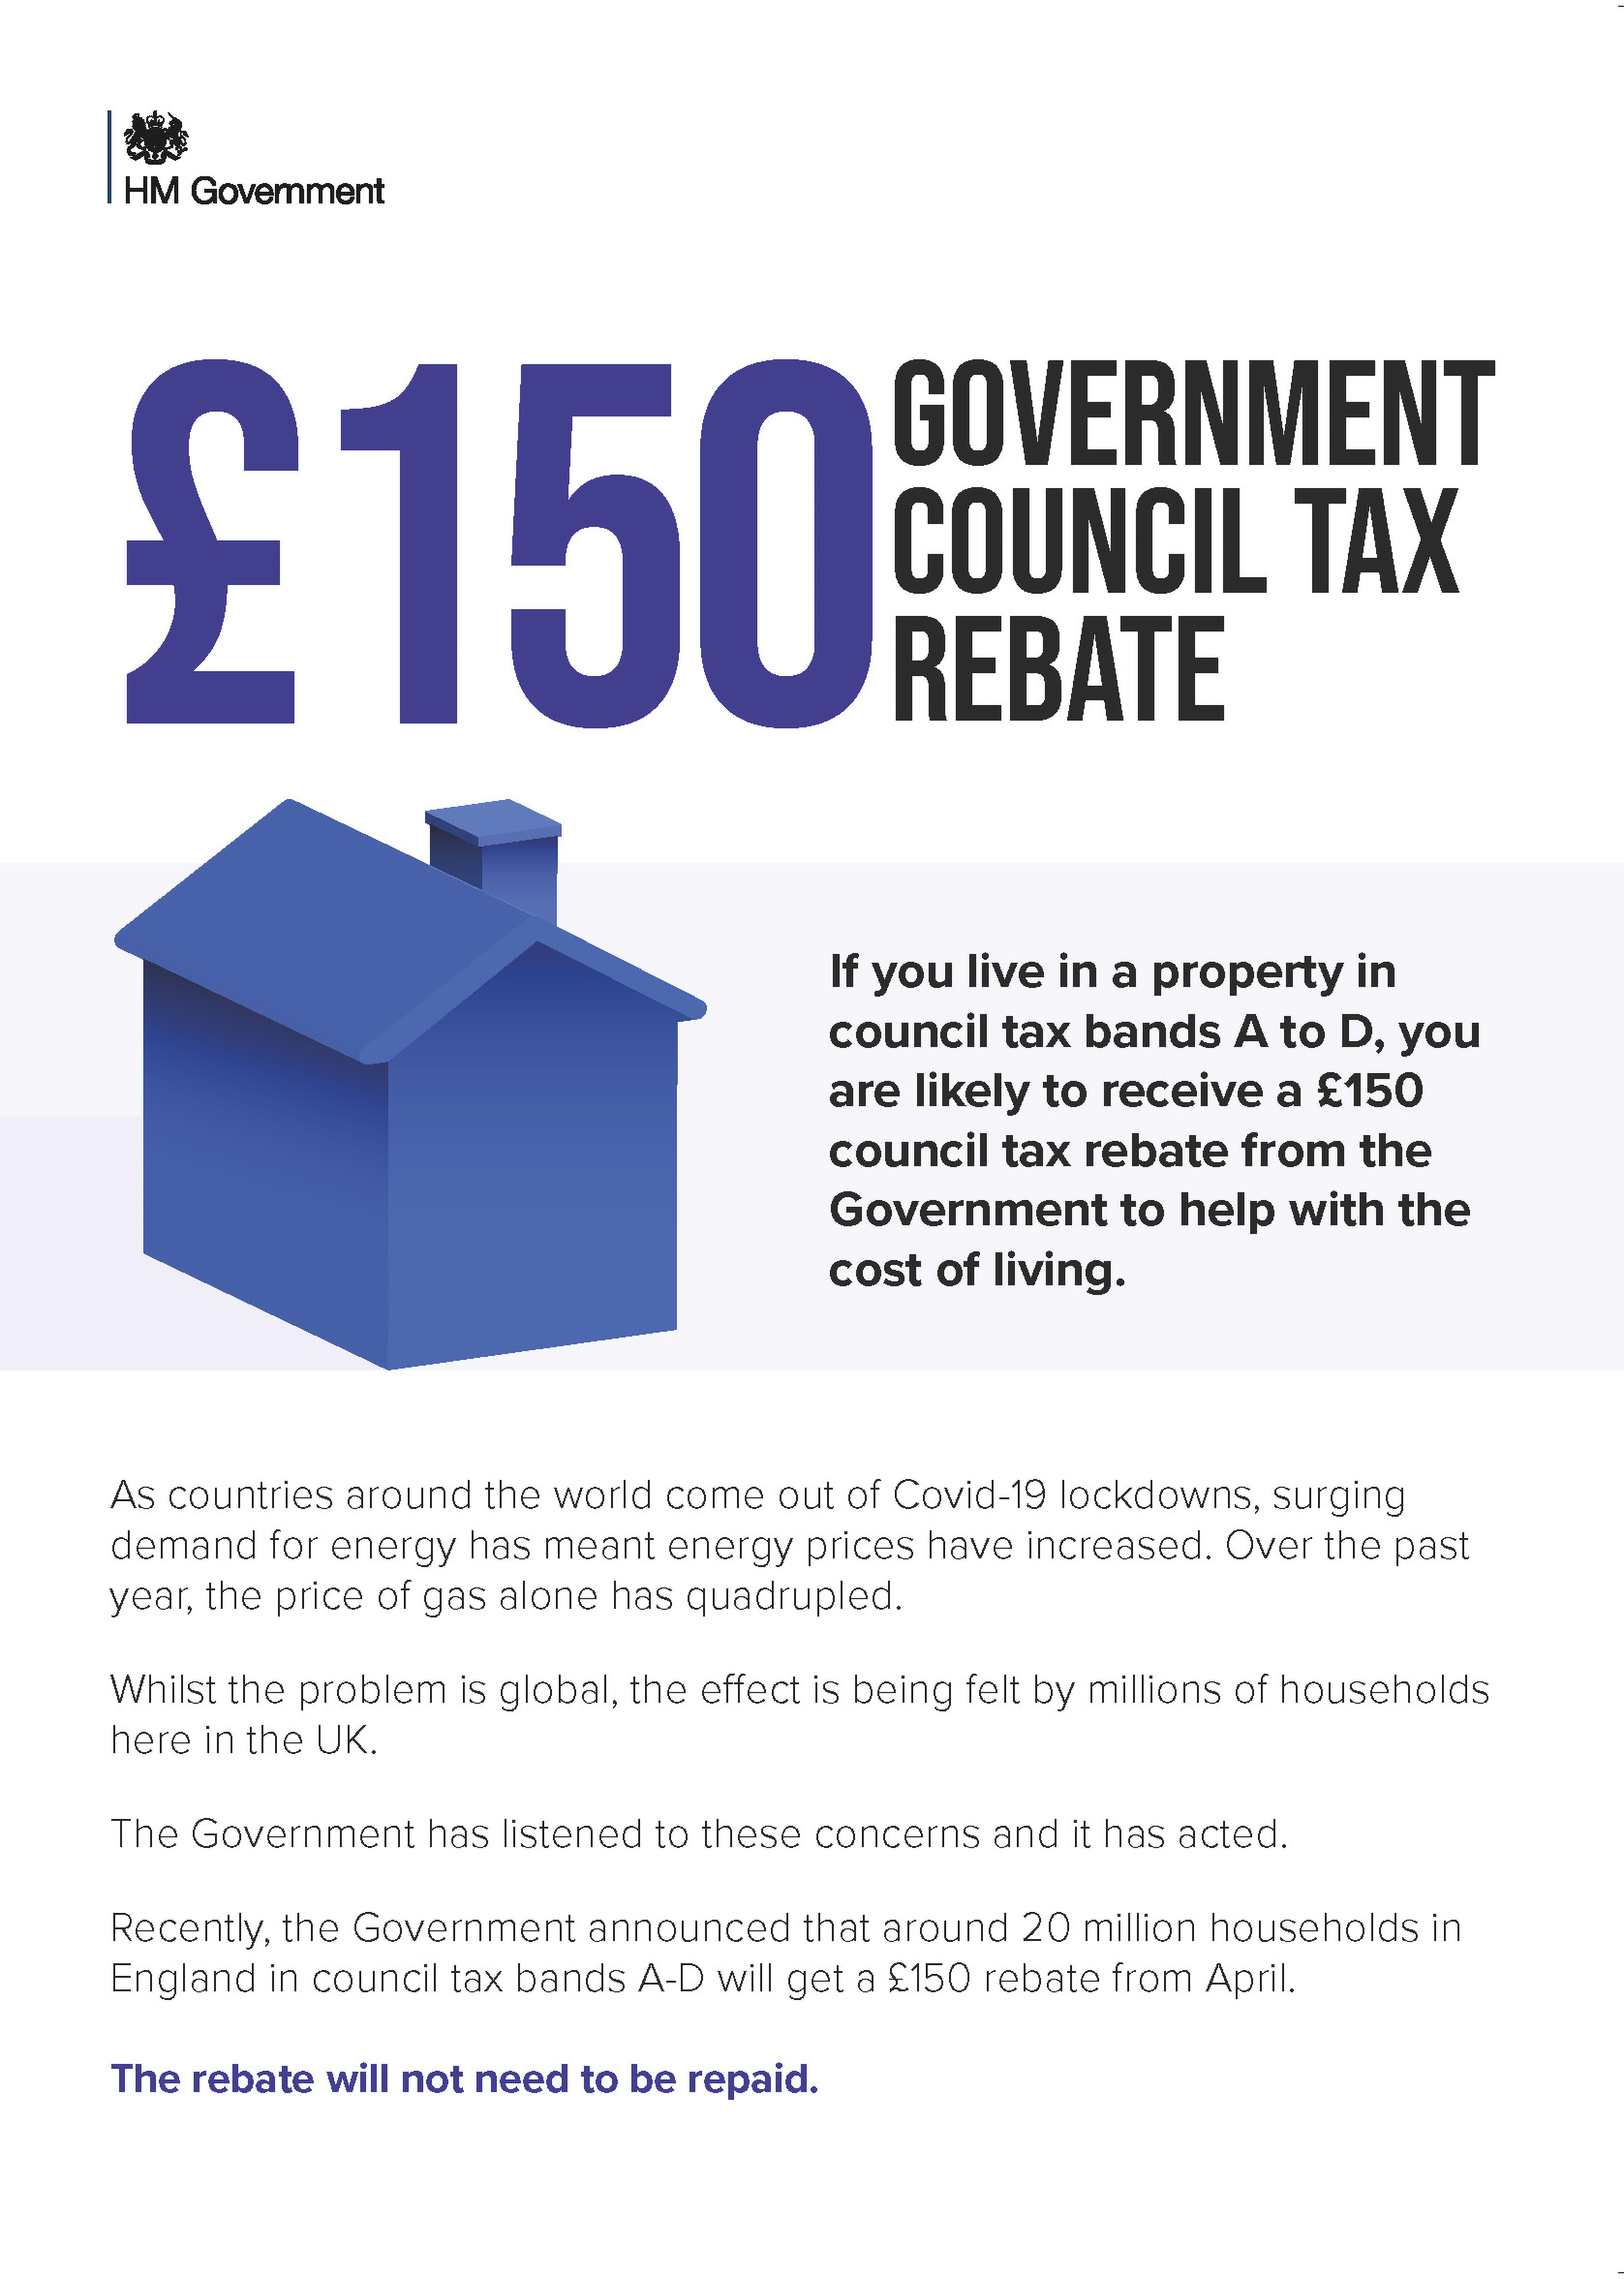 Government Council Tax rebate - About